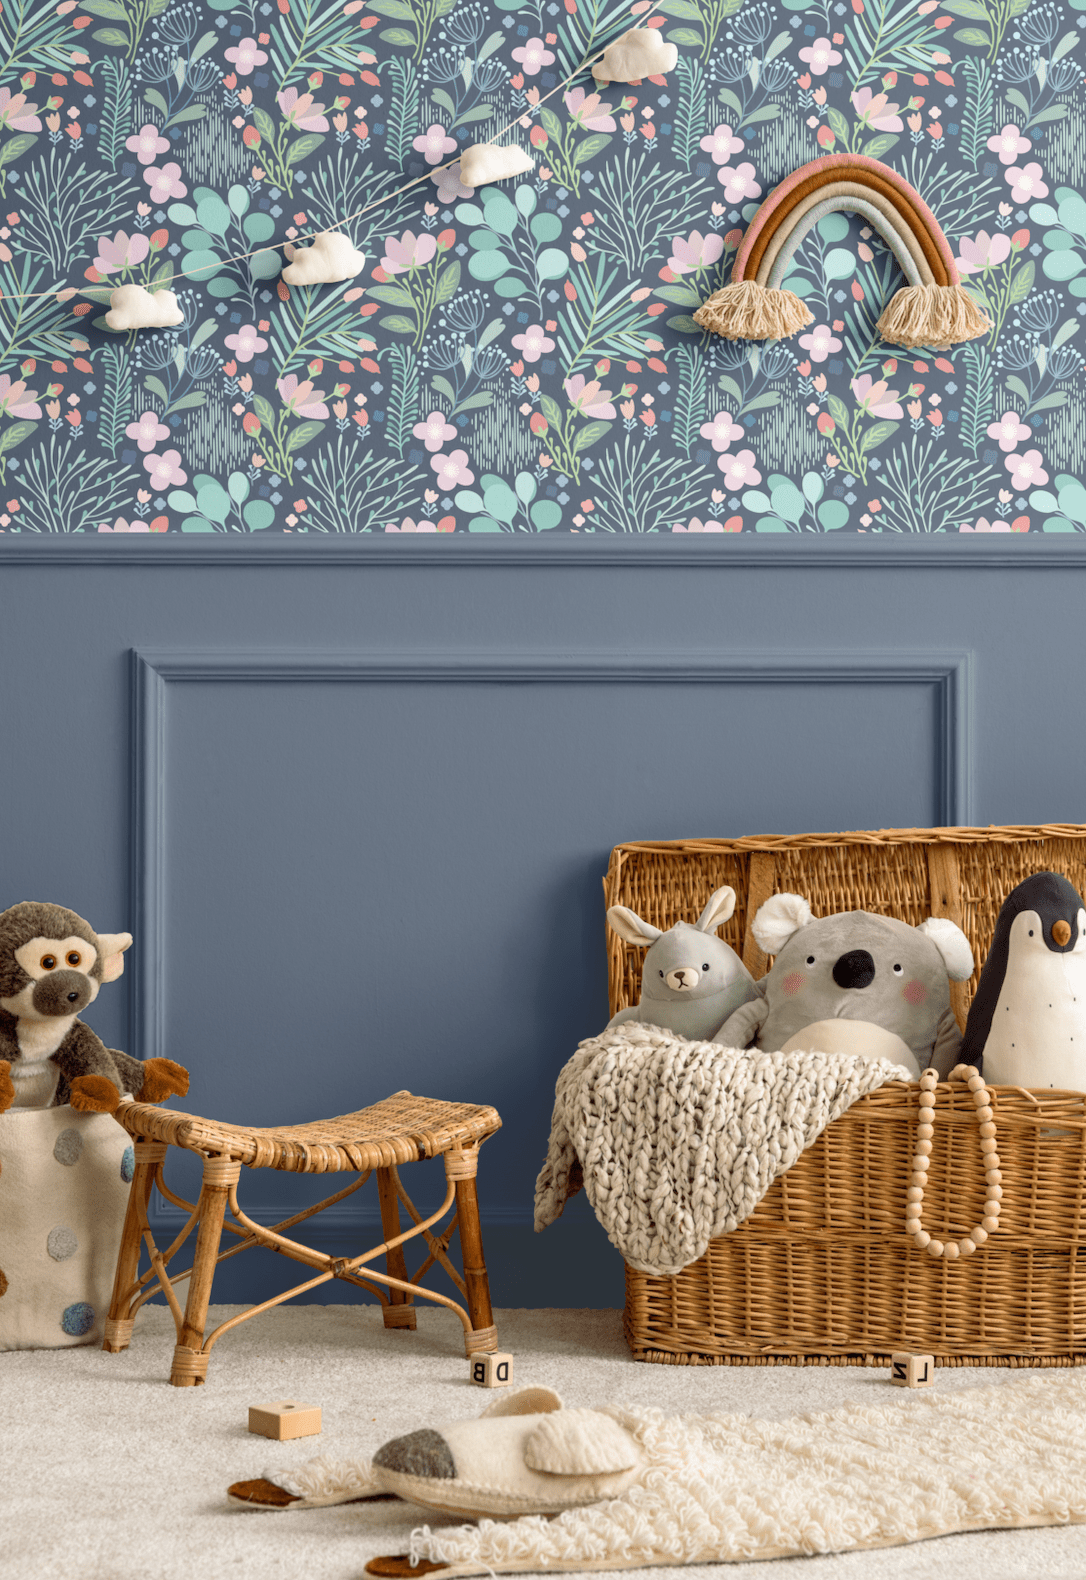 Nursery room with blue floral wallpaper featuring pastel-colored flowers and leaves on the upper half of the wall, a blue wainscoting panel below, and wicker baskets and stuffed animals as decor elements